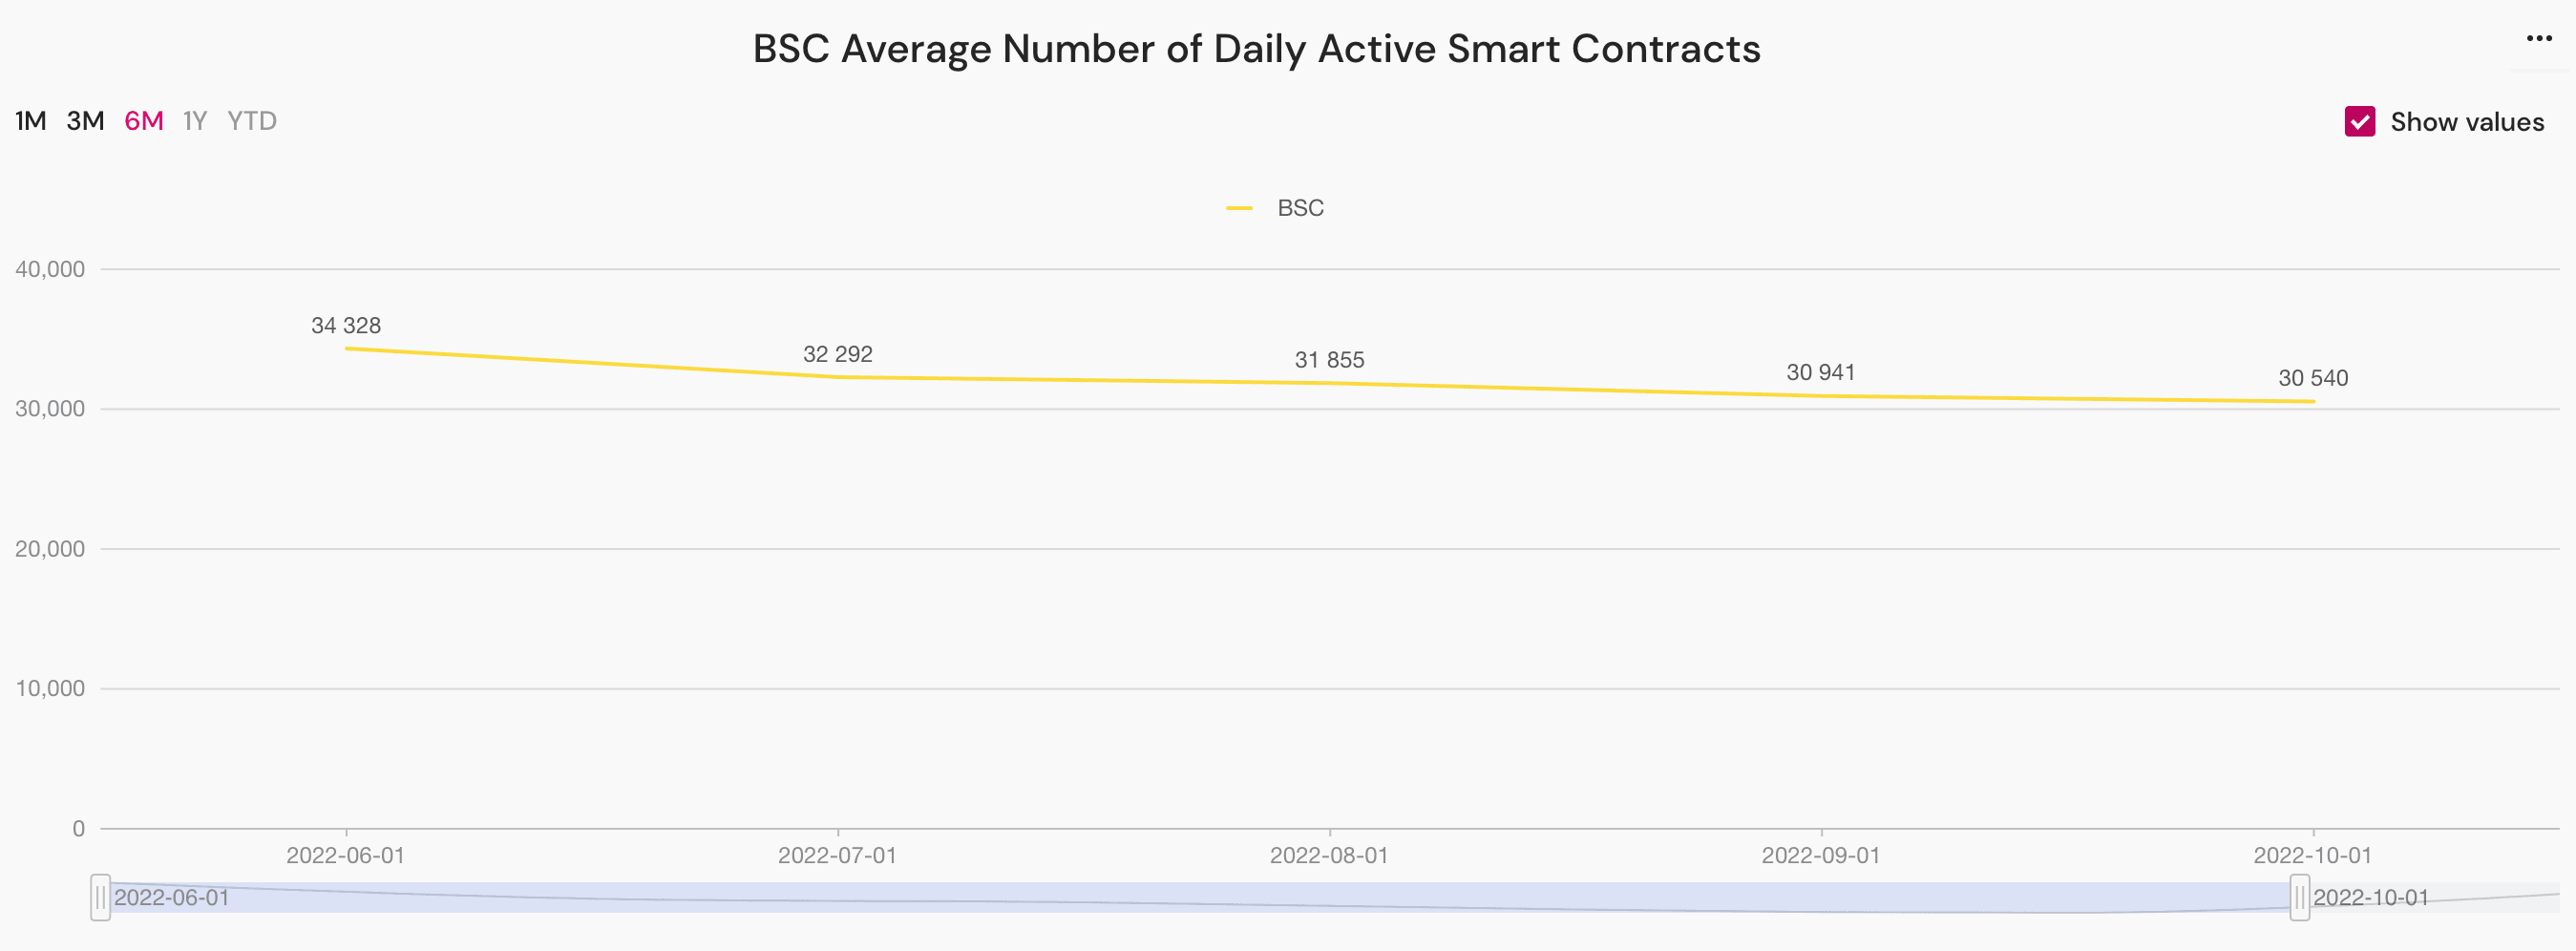 BSC average number of daily active smart contracts